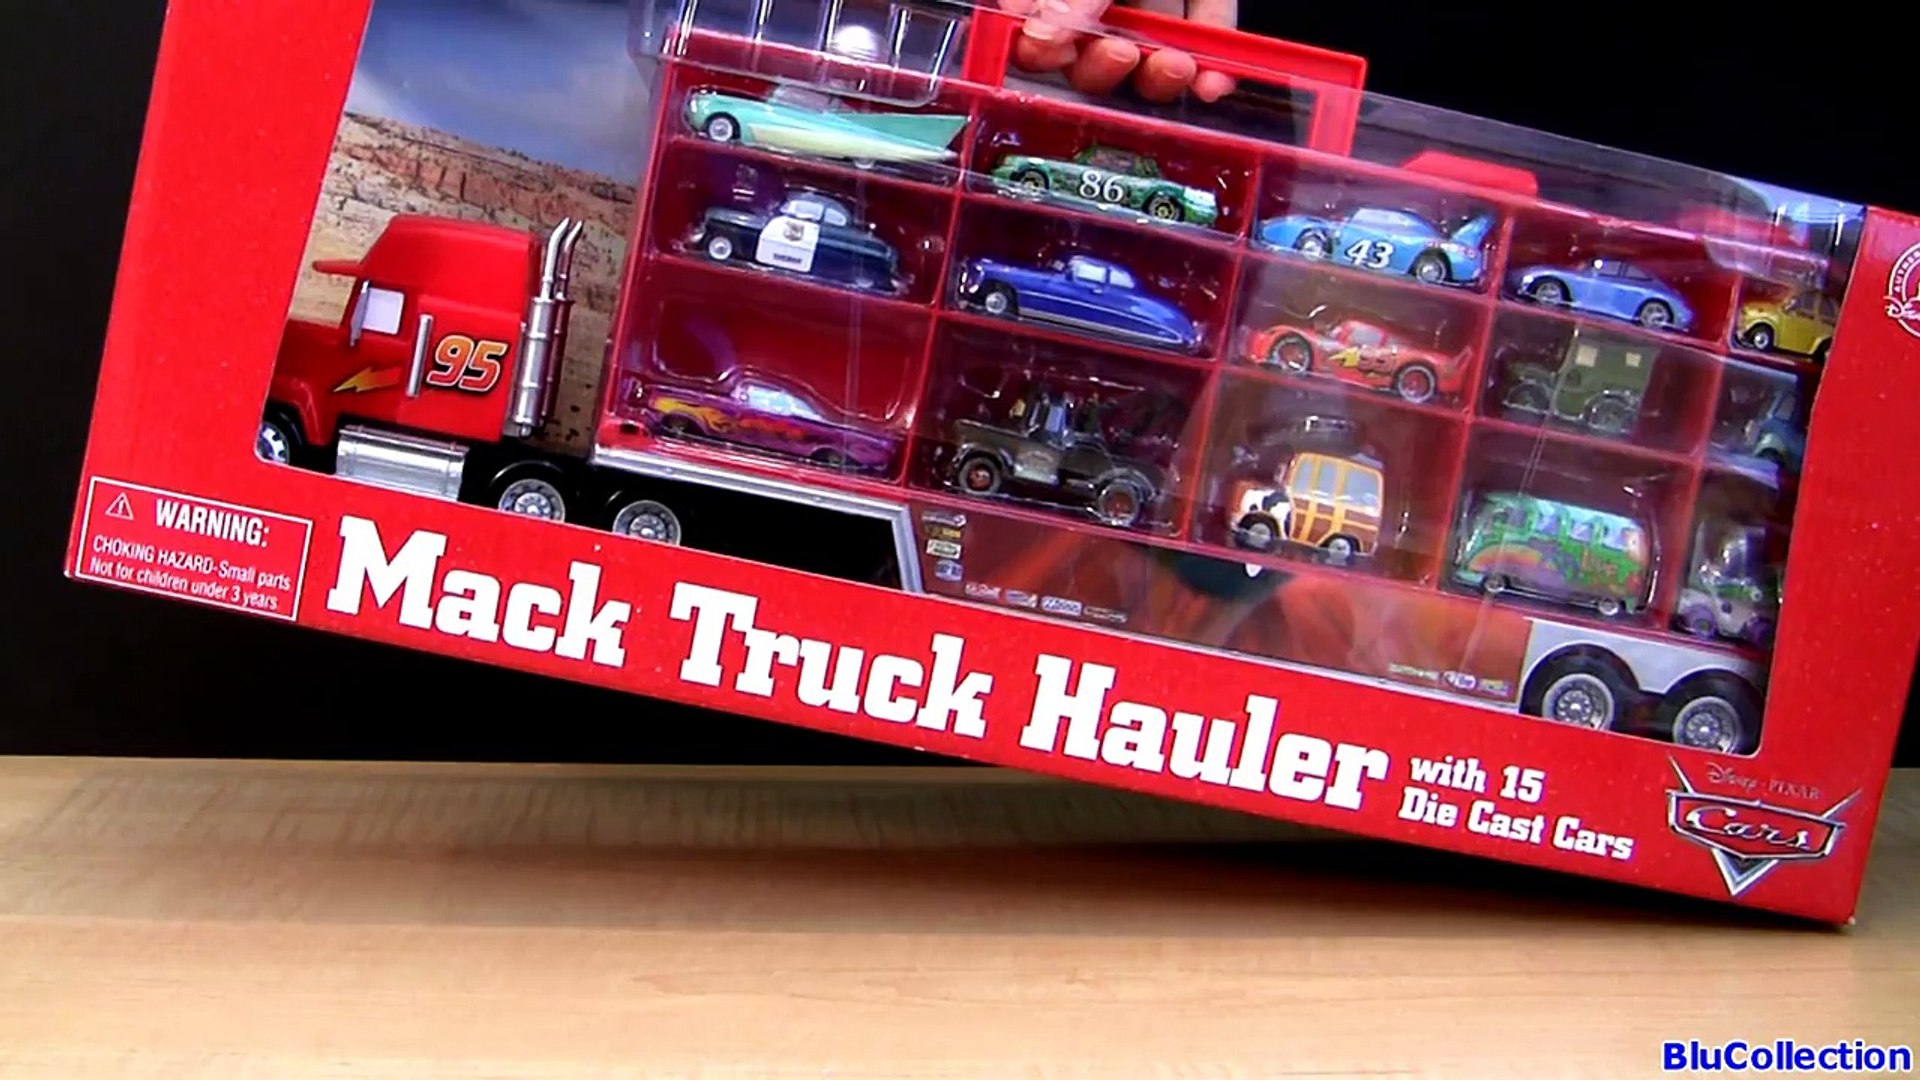 Disney Cars Truck Hauler Carry Case Store 30 Diecasts Buzz Toy Story マ - Dailymotion Video